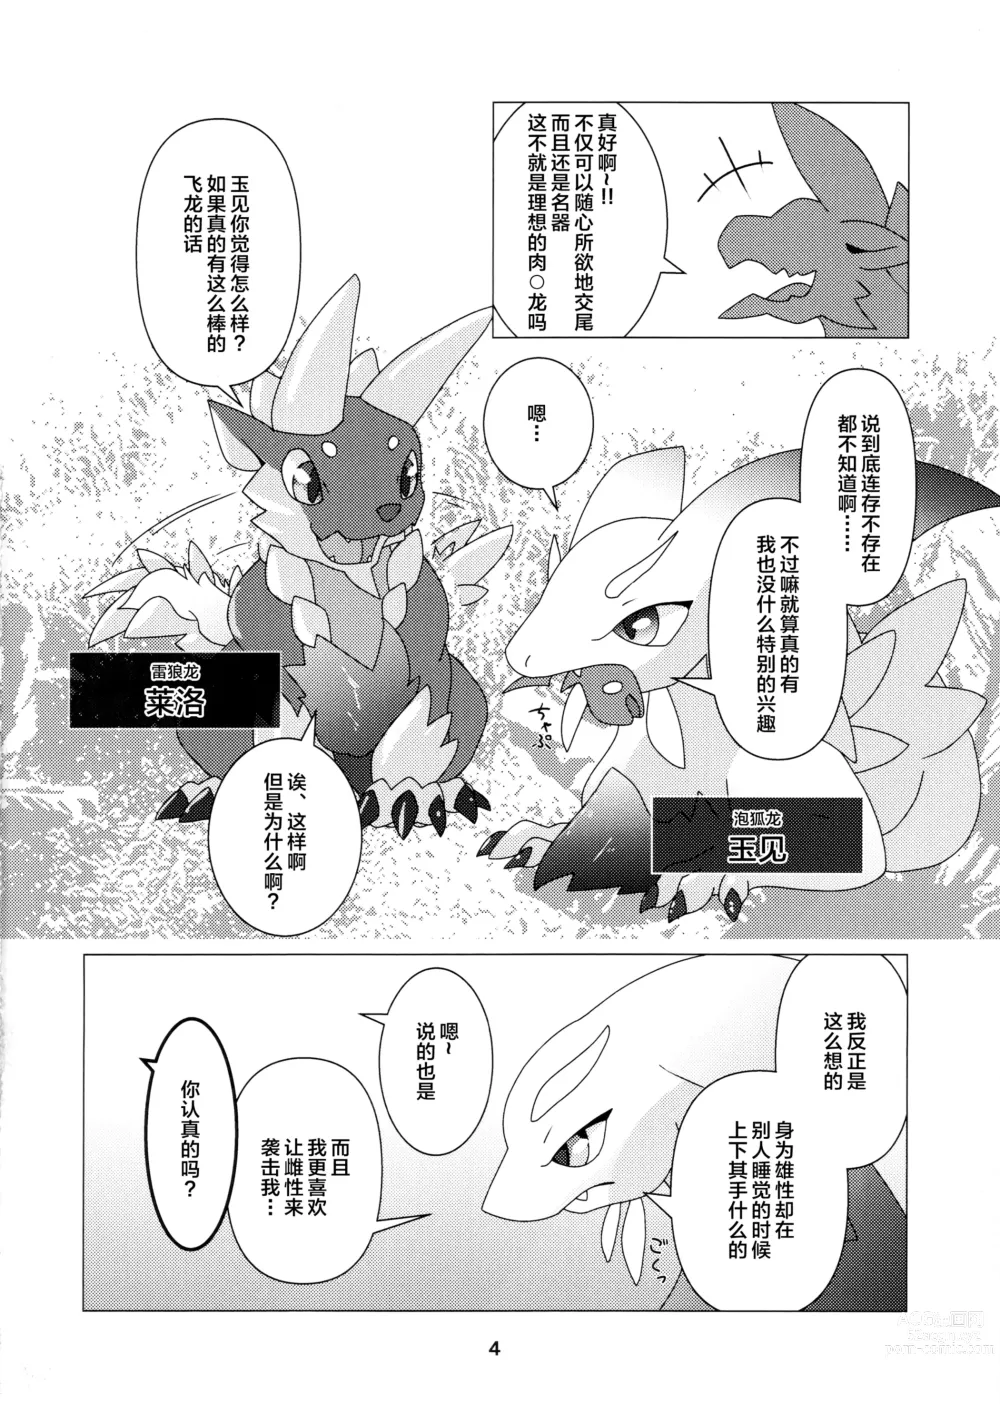 Page 3 of doujinshi 溪流的睡美人